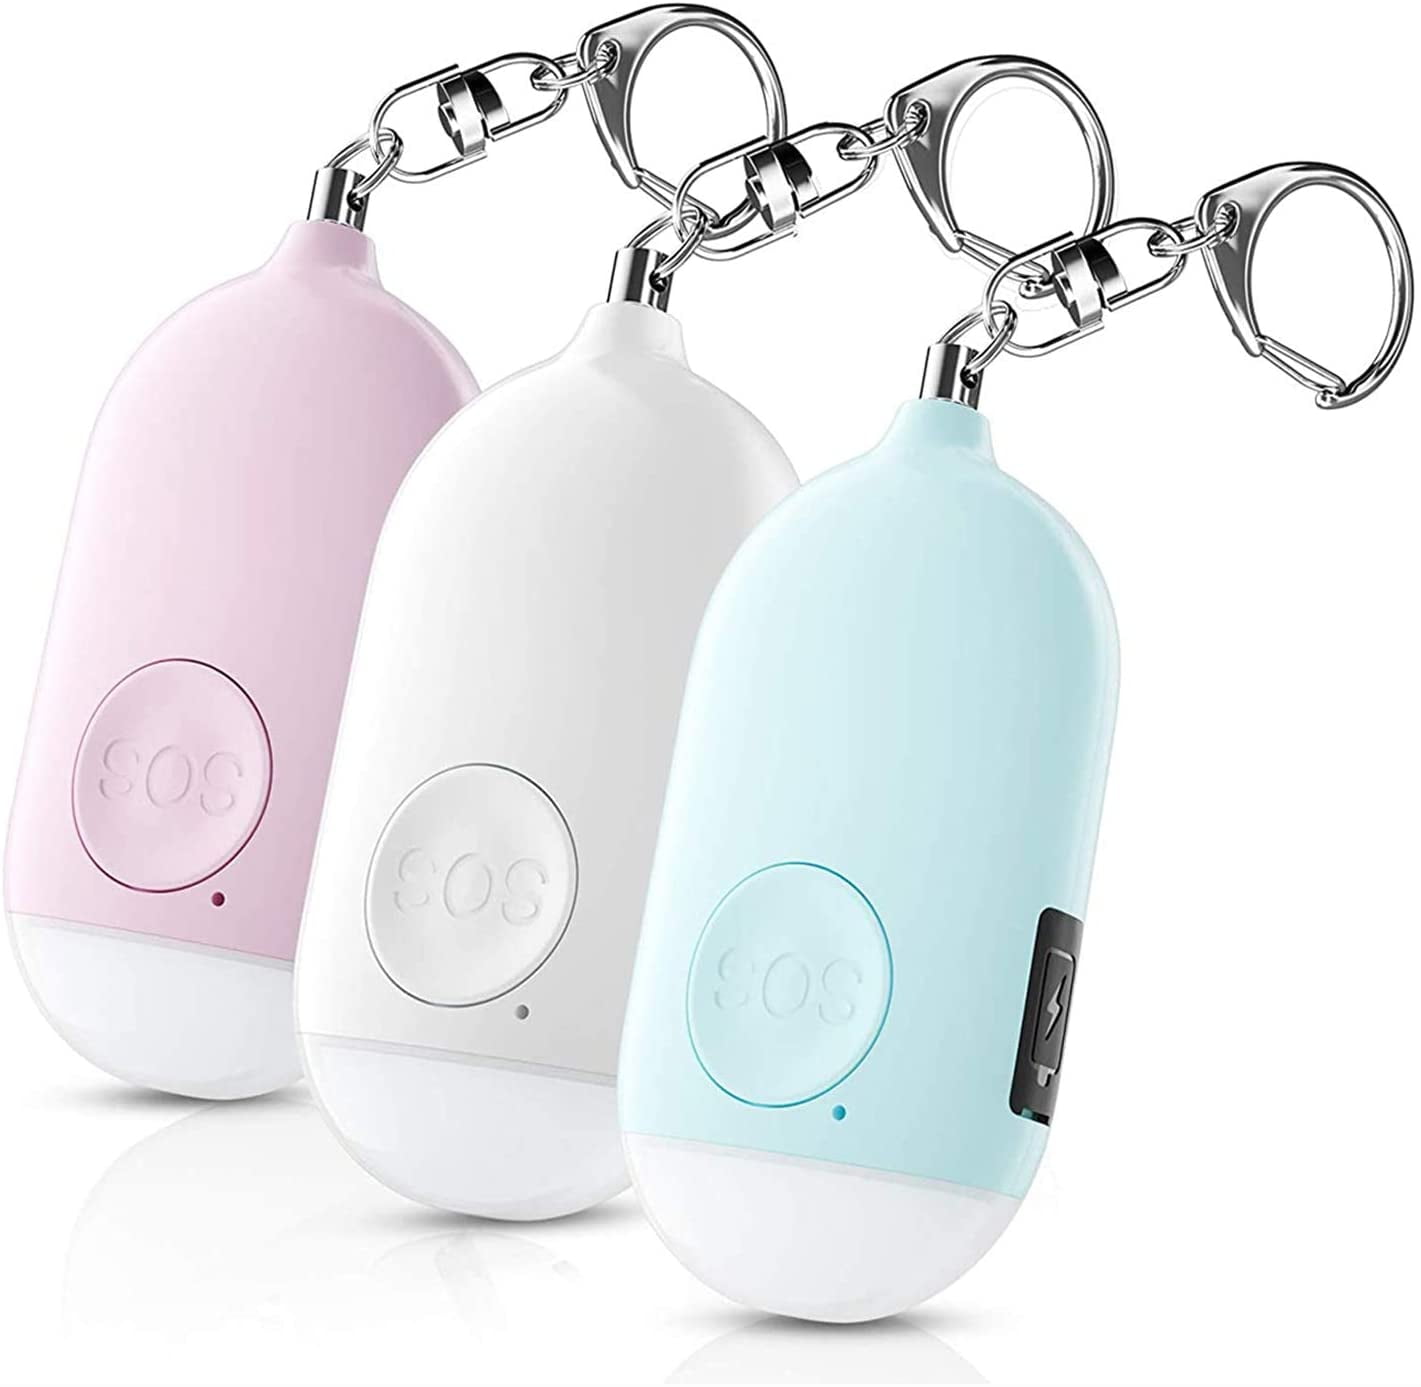 Rechargeable 130dB Personal Safety Alarm Keychain Attack Emergency Security LED 